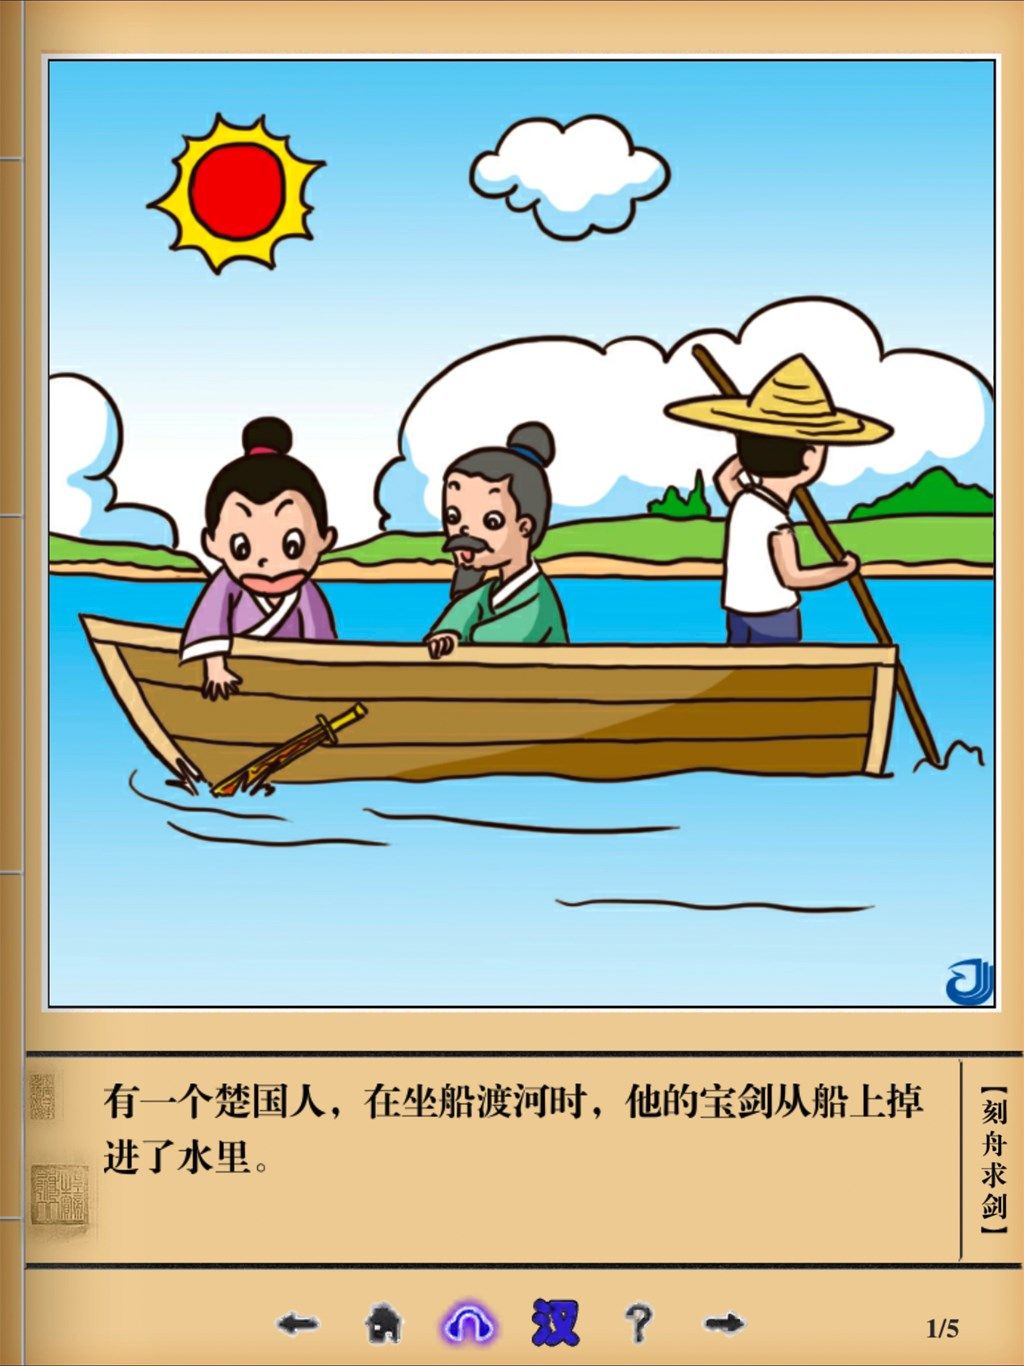 Chinese Idioms: Comic Book